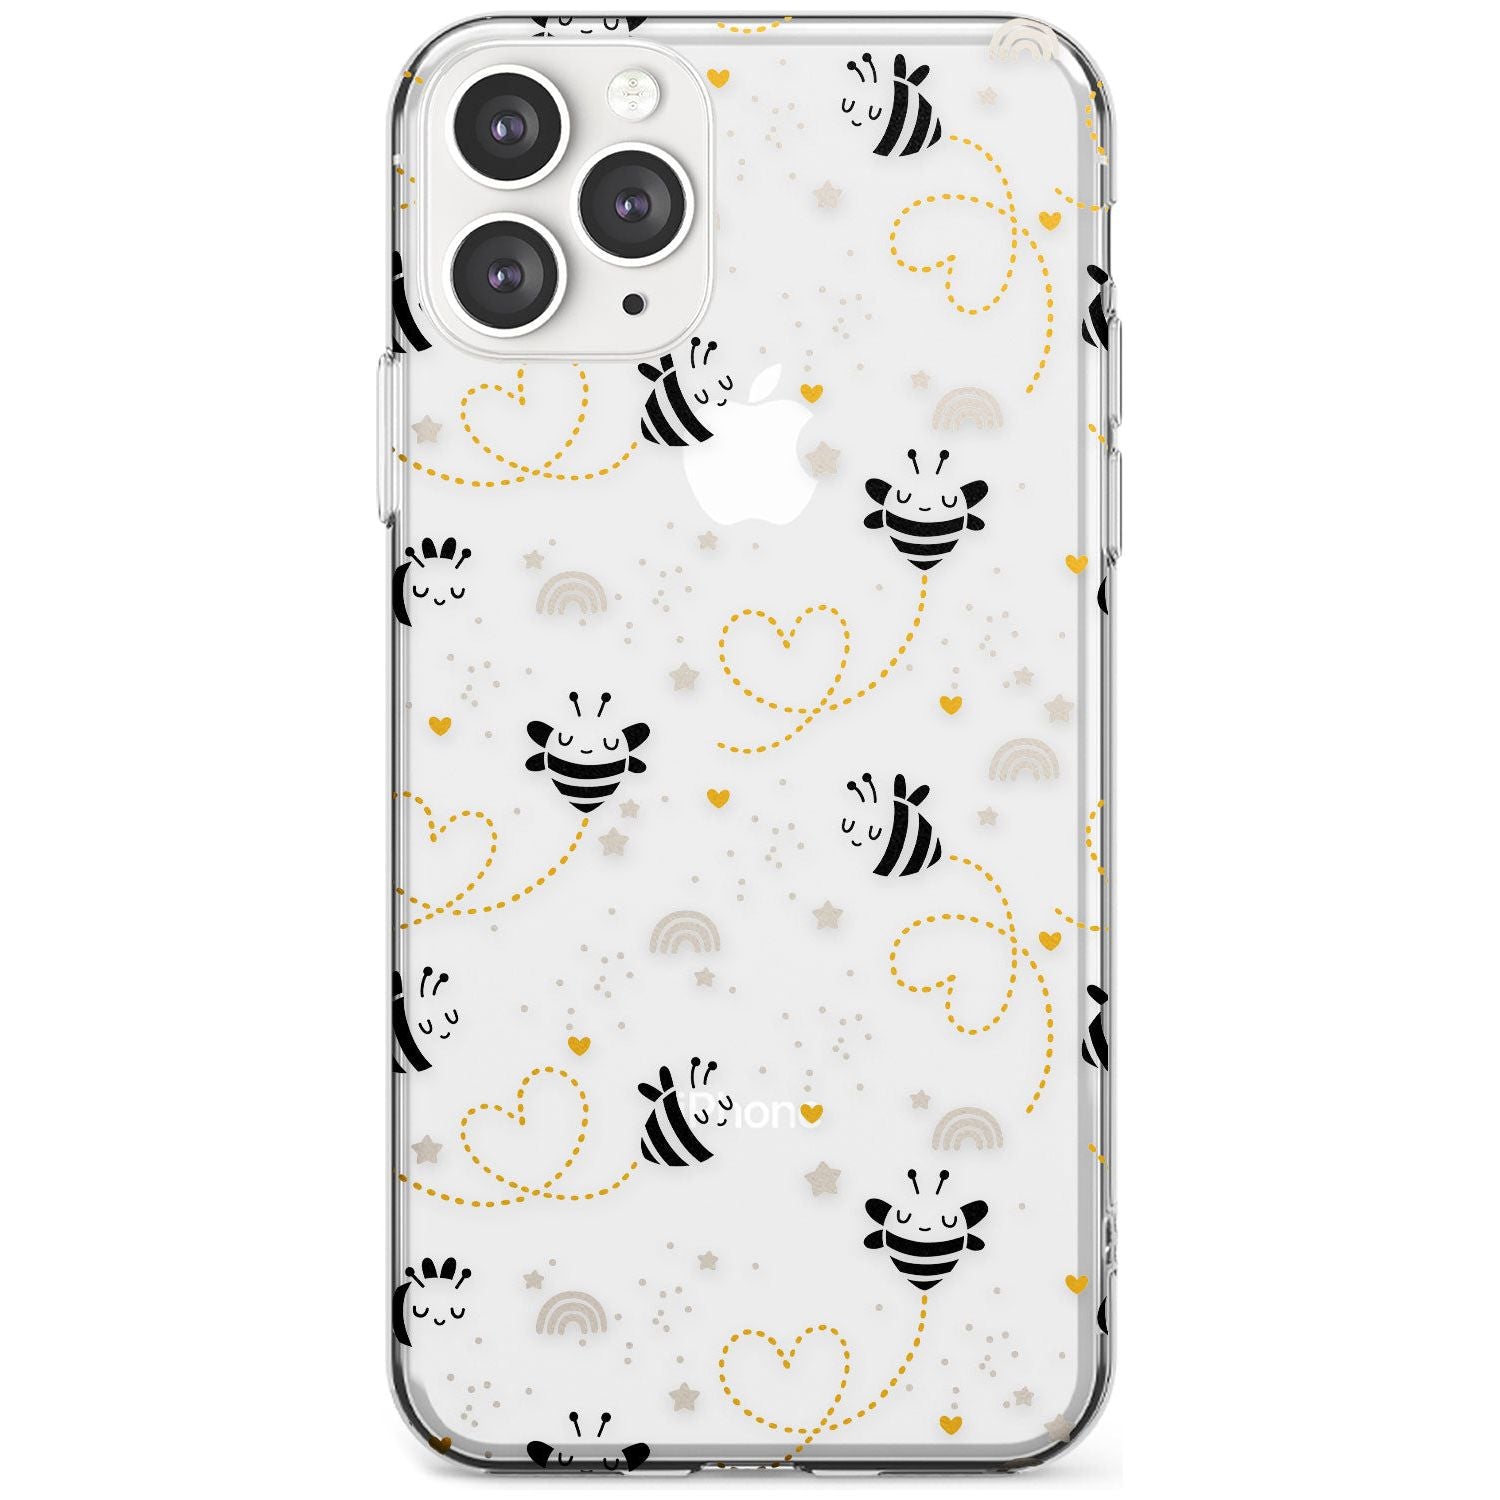 Sweet as Honey Patterns: Bees & Hearts (Clear) Slim TPU Phone Case for iPhone 11 Pro Max